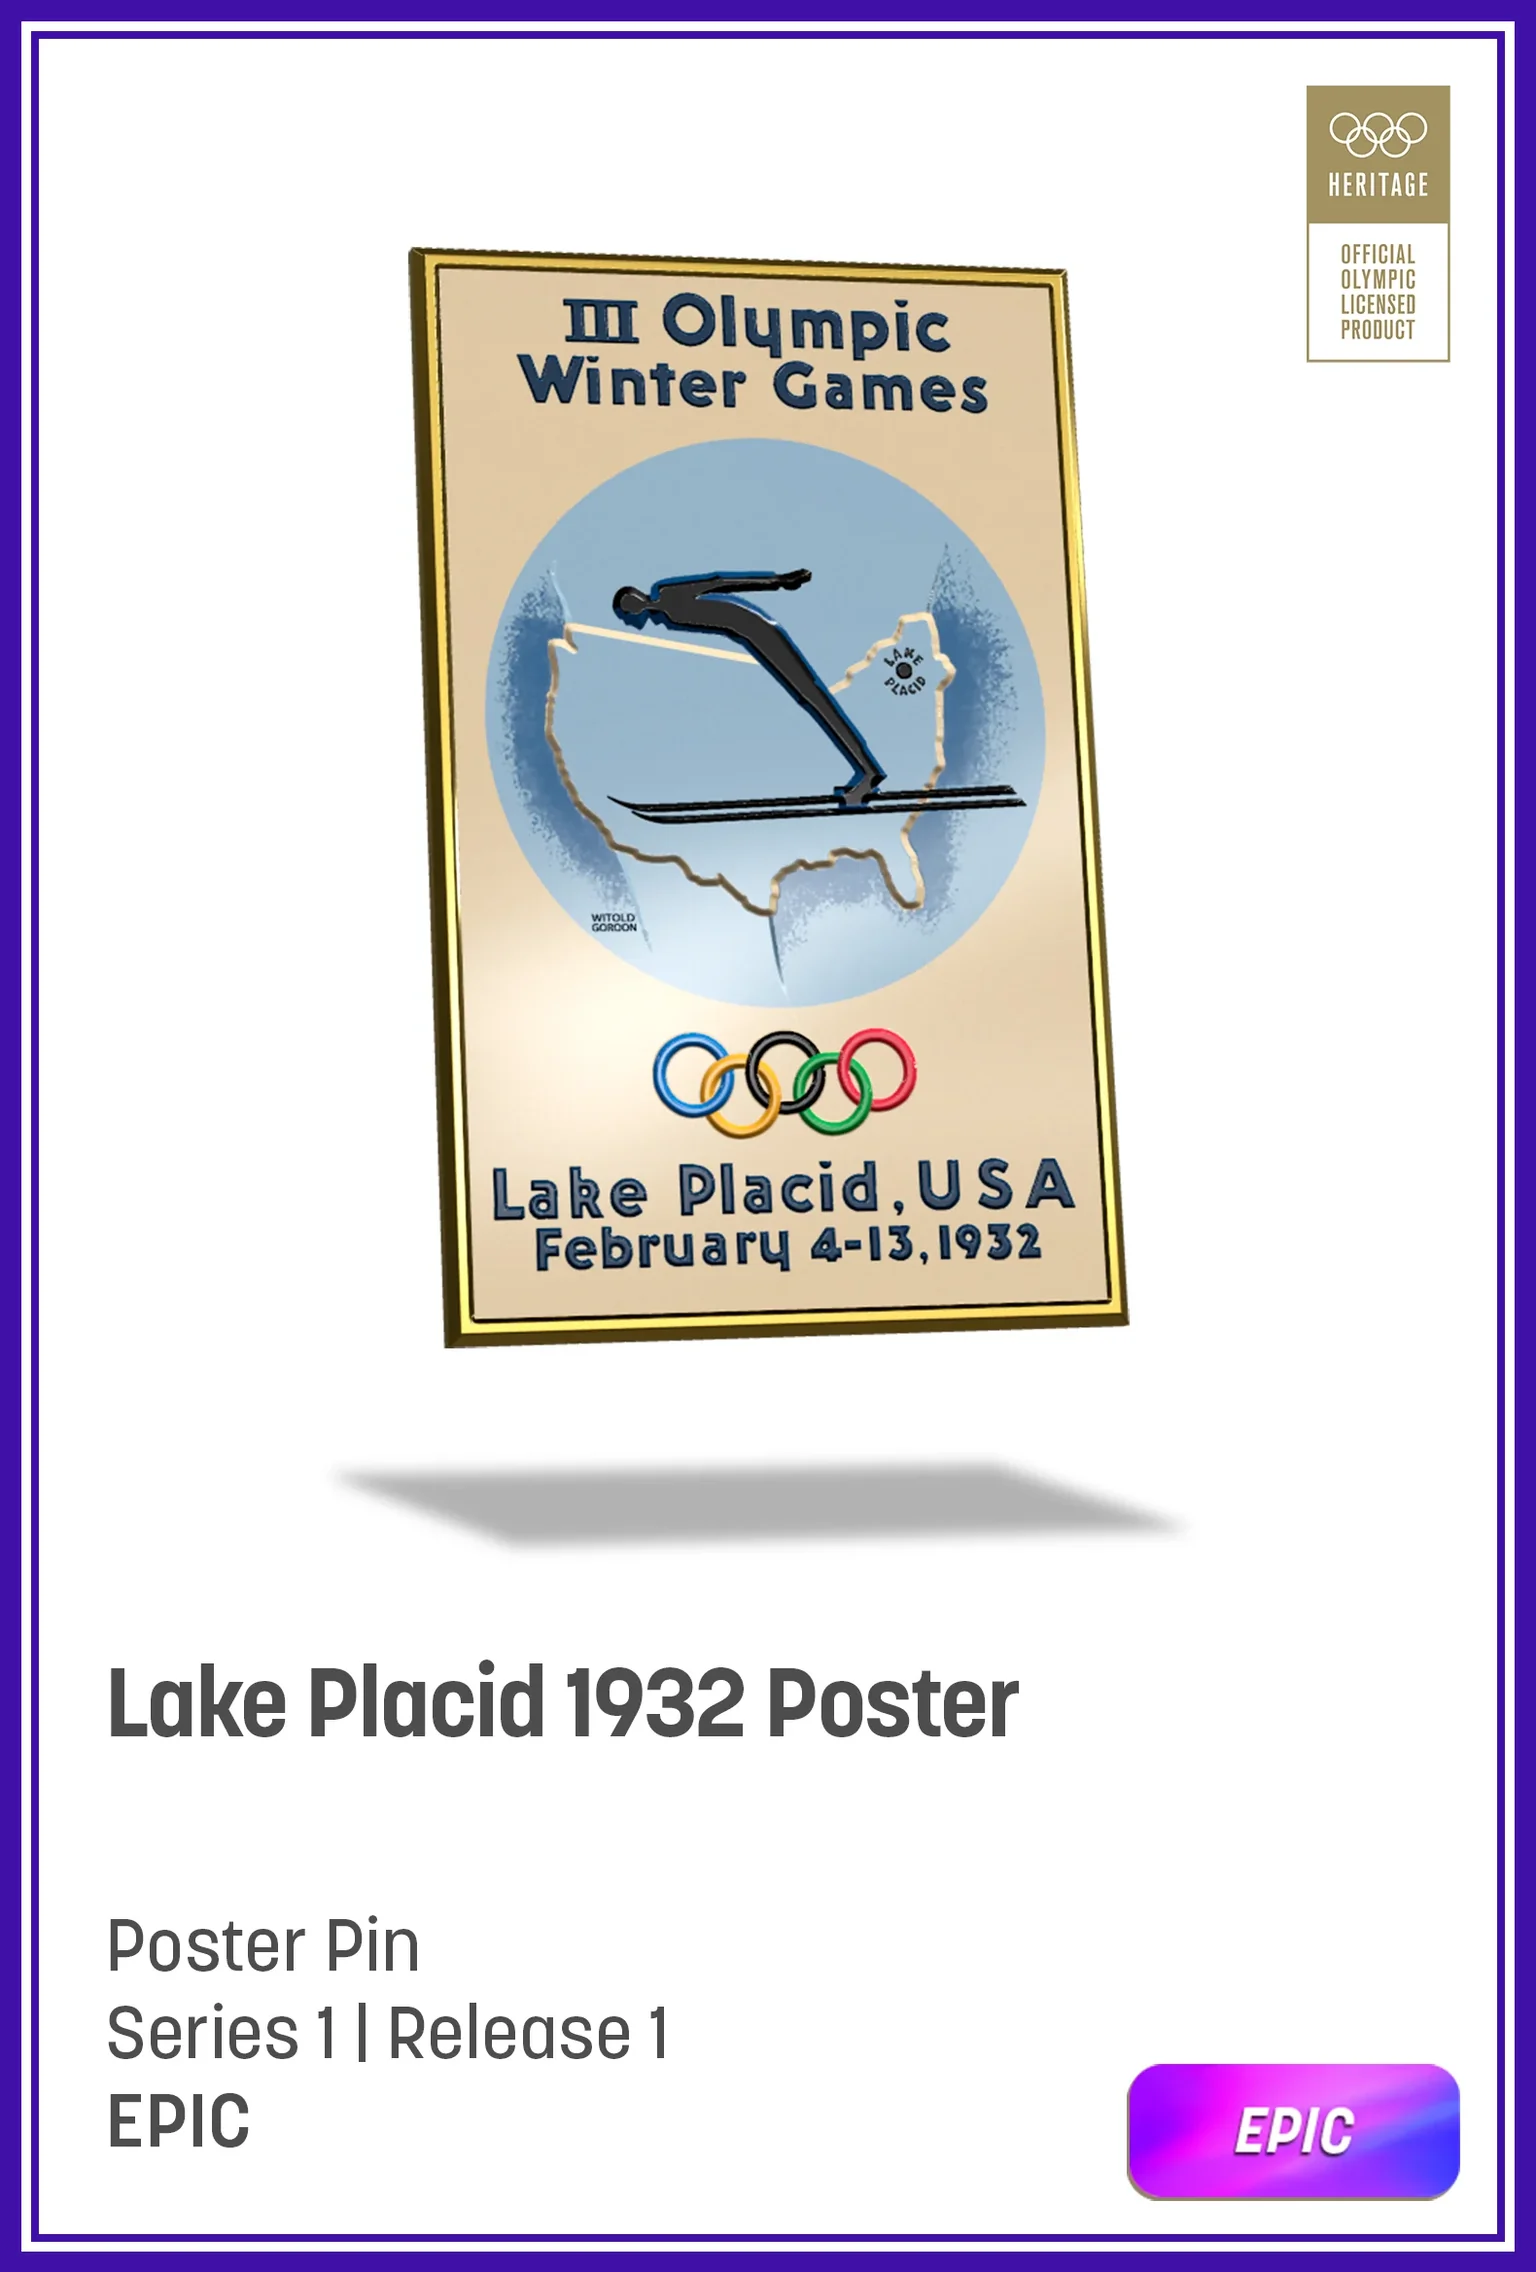 A digital card from Olympic Winter Games in 1932